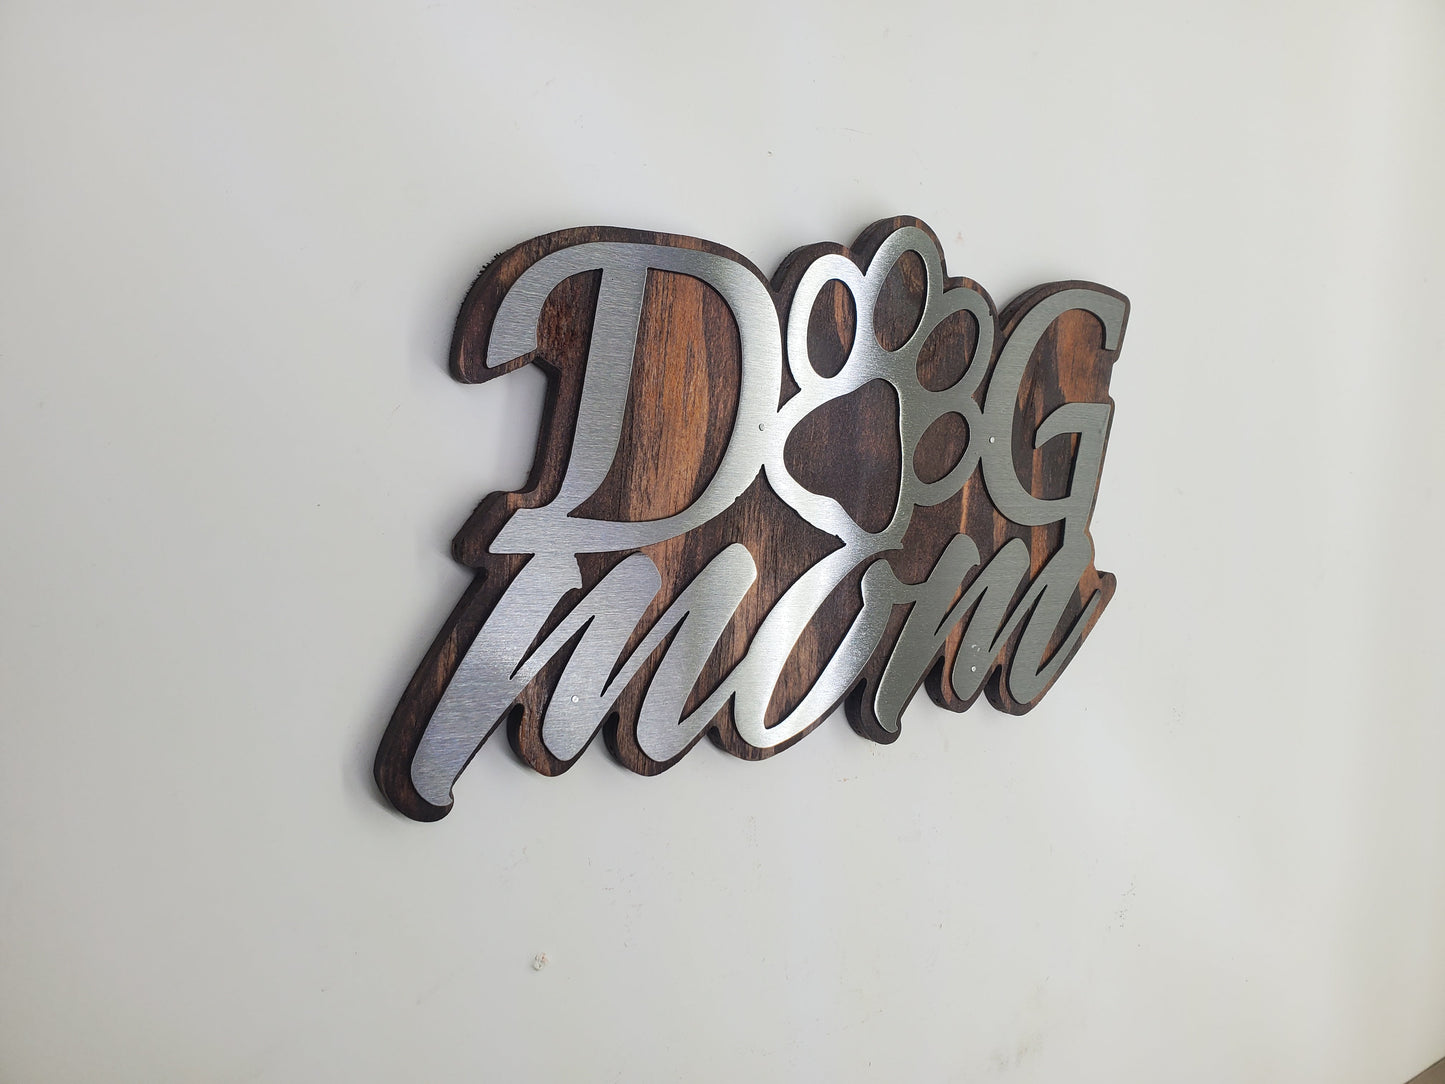 Dog Mom Wall Art | Rustic Wood and Metal Dog Mom Wall Décor | Sculpture Art   Made in USA